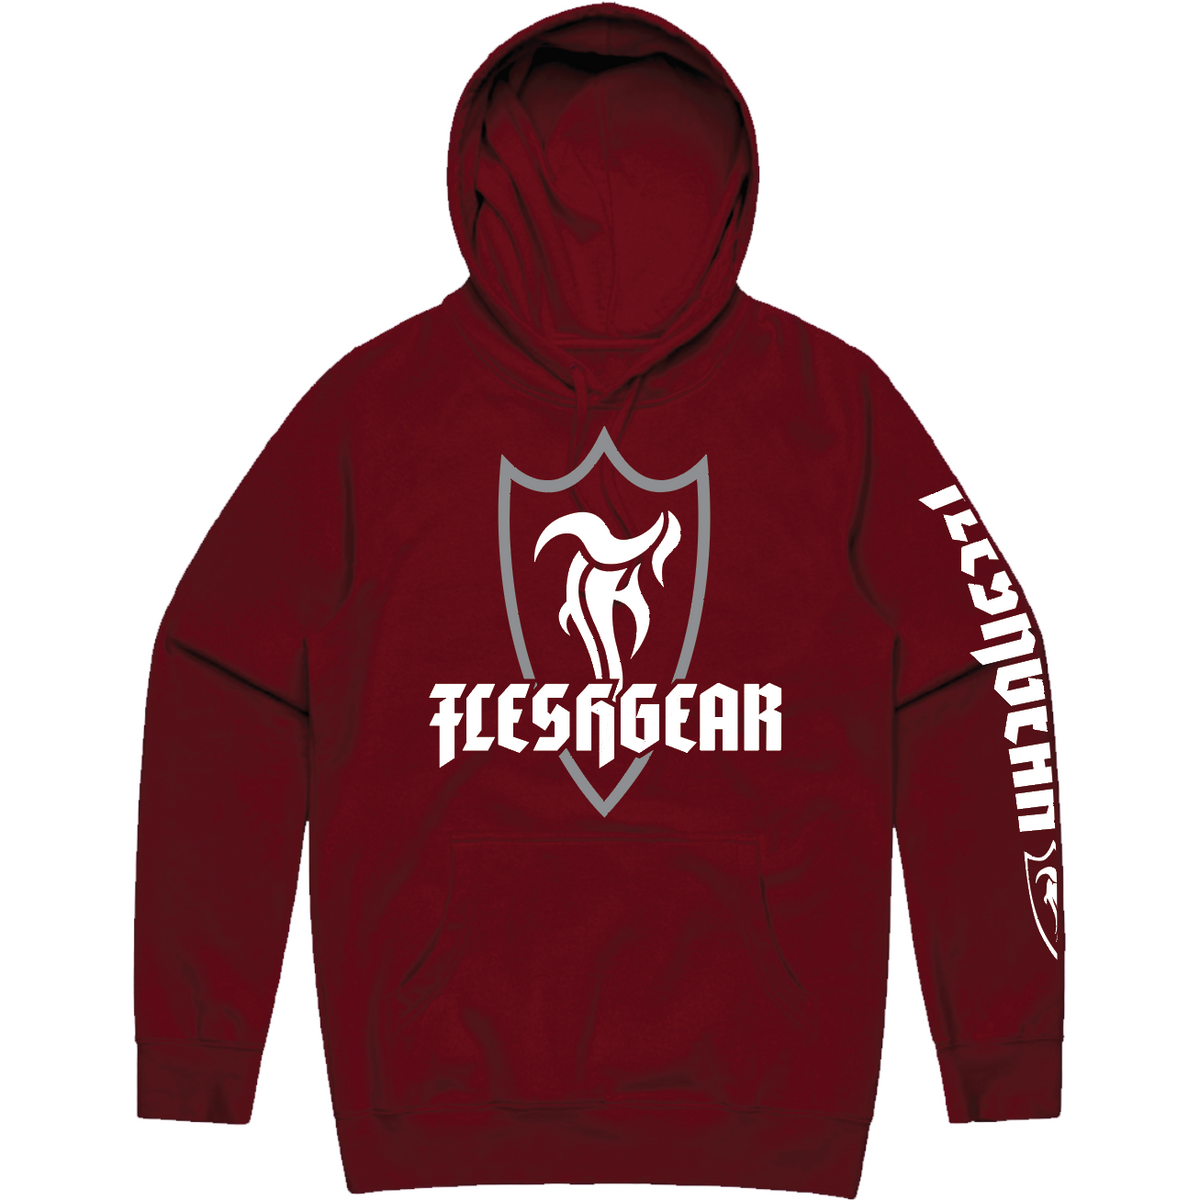 FLESHGEAR-Men's-Knit-Hooded-Pullover-Guard - PULLOVER HOODIE - Synik Clothing - synikclothing.com